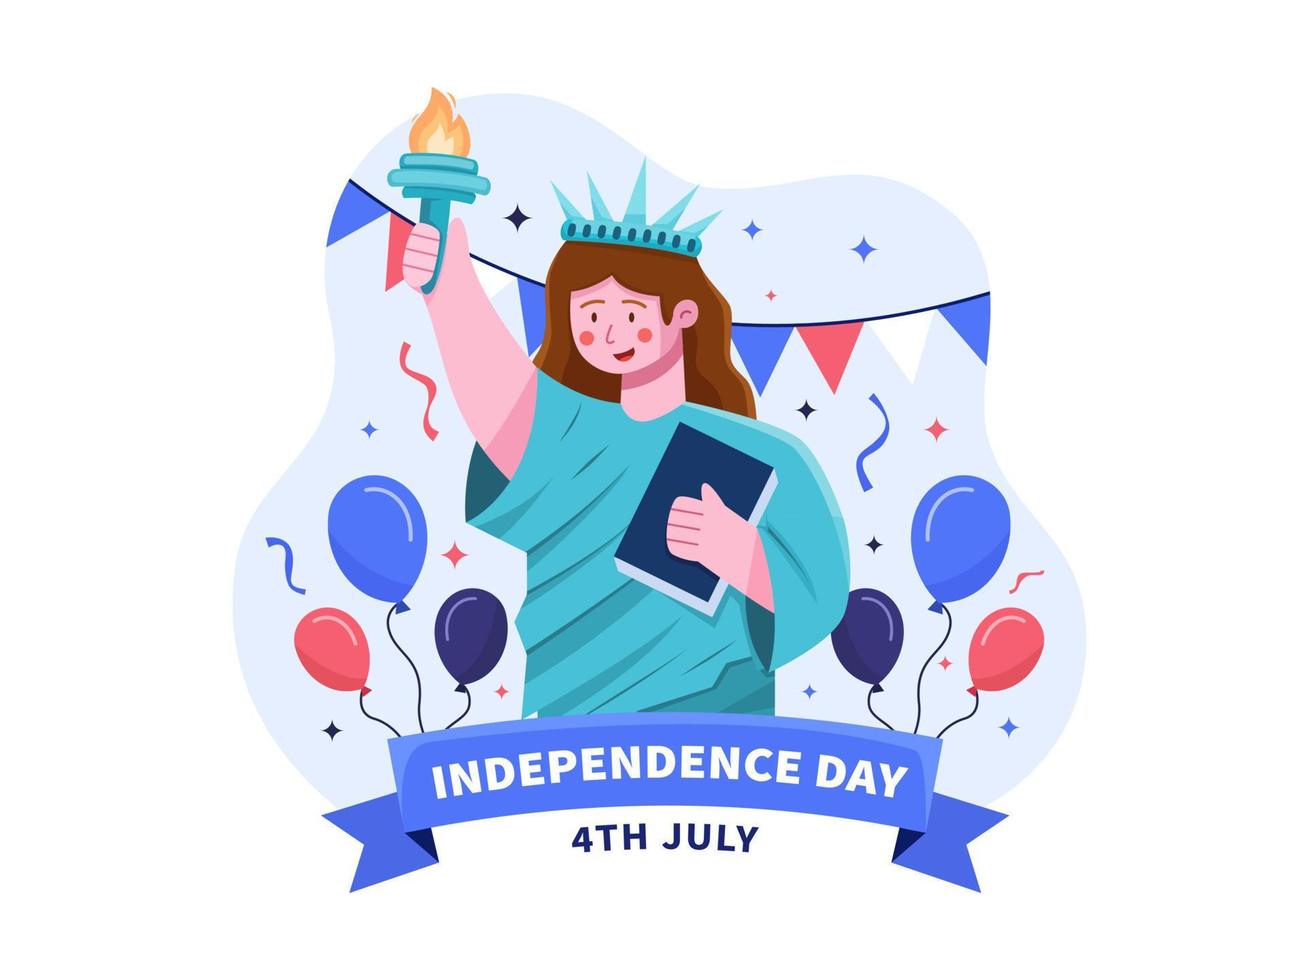 4th July USA Independence Day Illustration With Woman Wearing Statue of Liberty Costume. American Landmark Liberty Statue Cartoon. Can be used for greeting card, postcard, banner, web, etc. vector